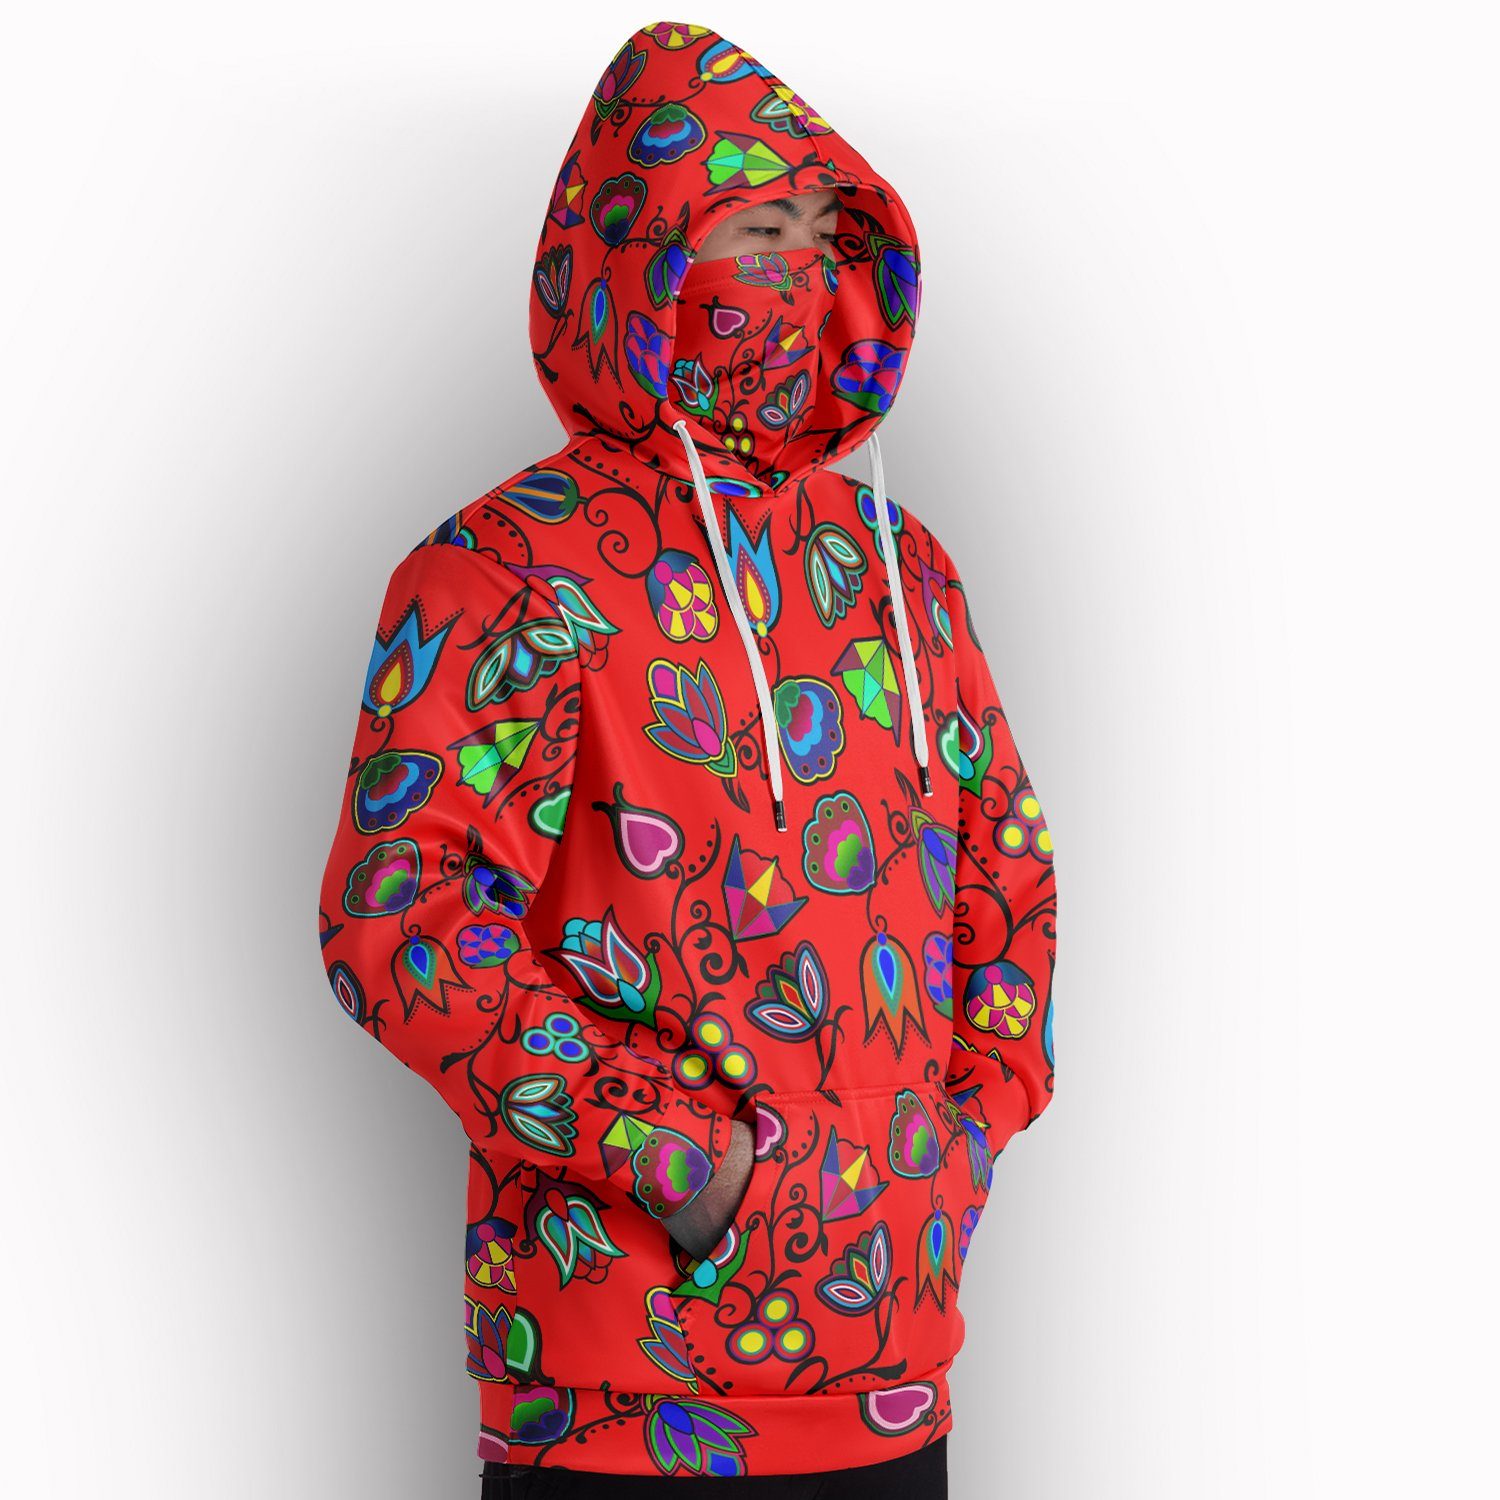 Indigenous Paisley Dahlia Hoodie with Face Cover 49 Dzine 